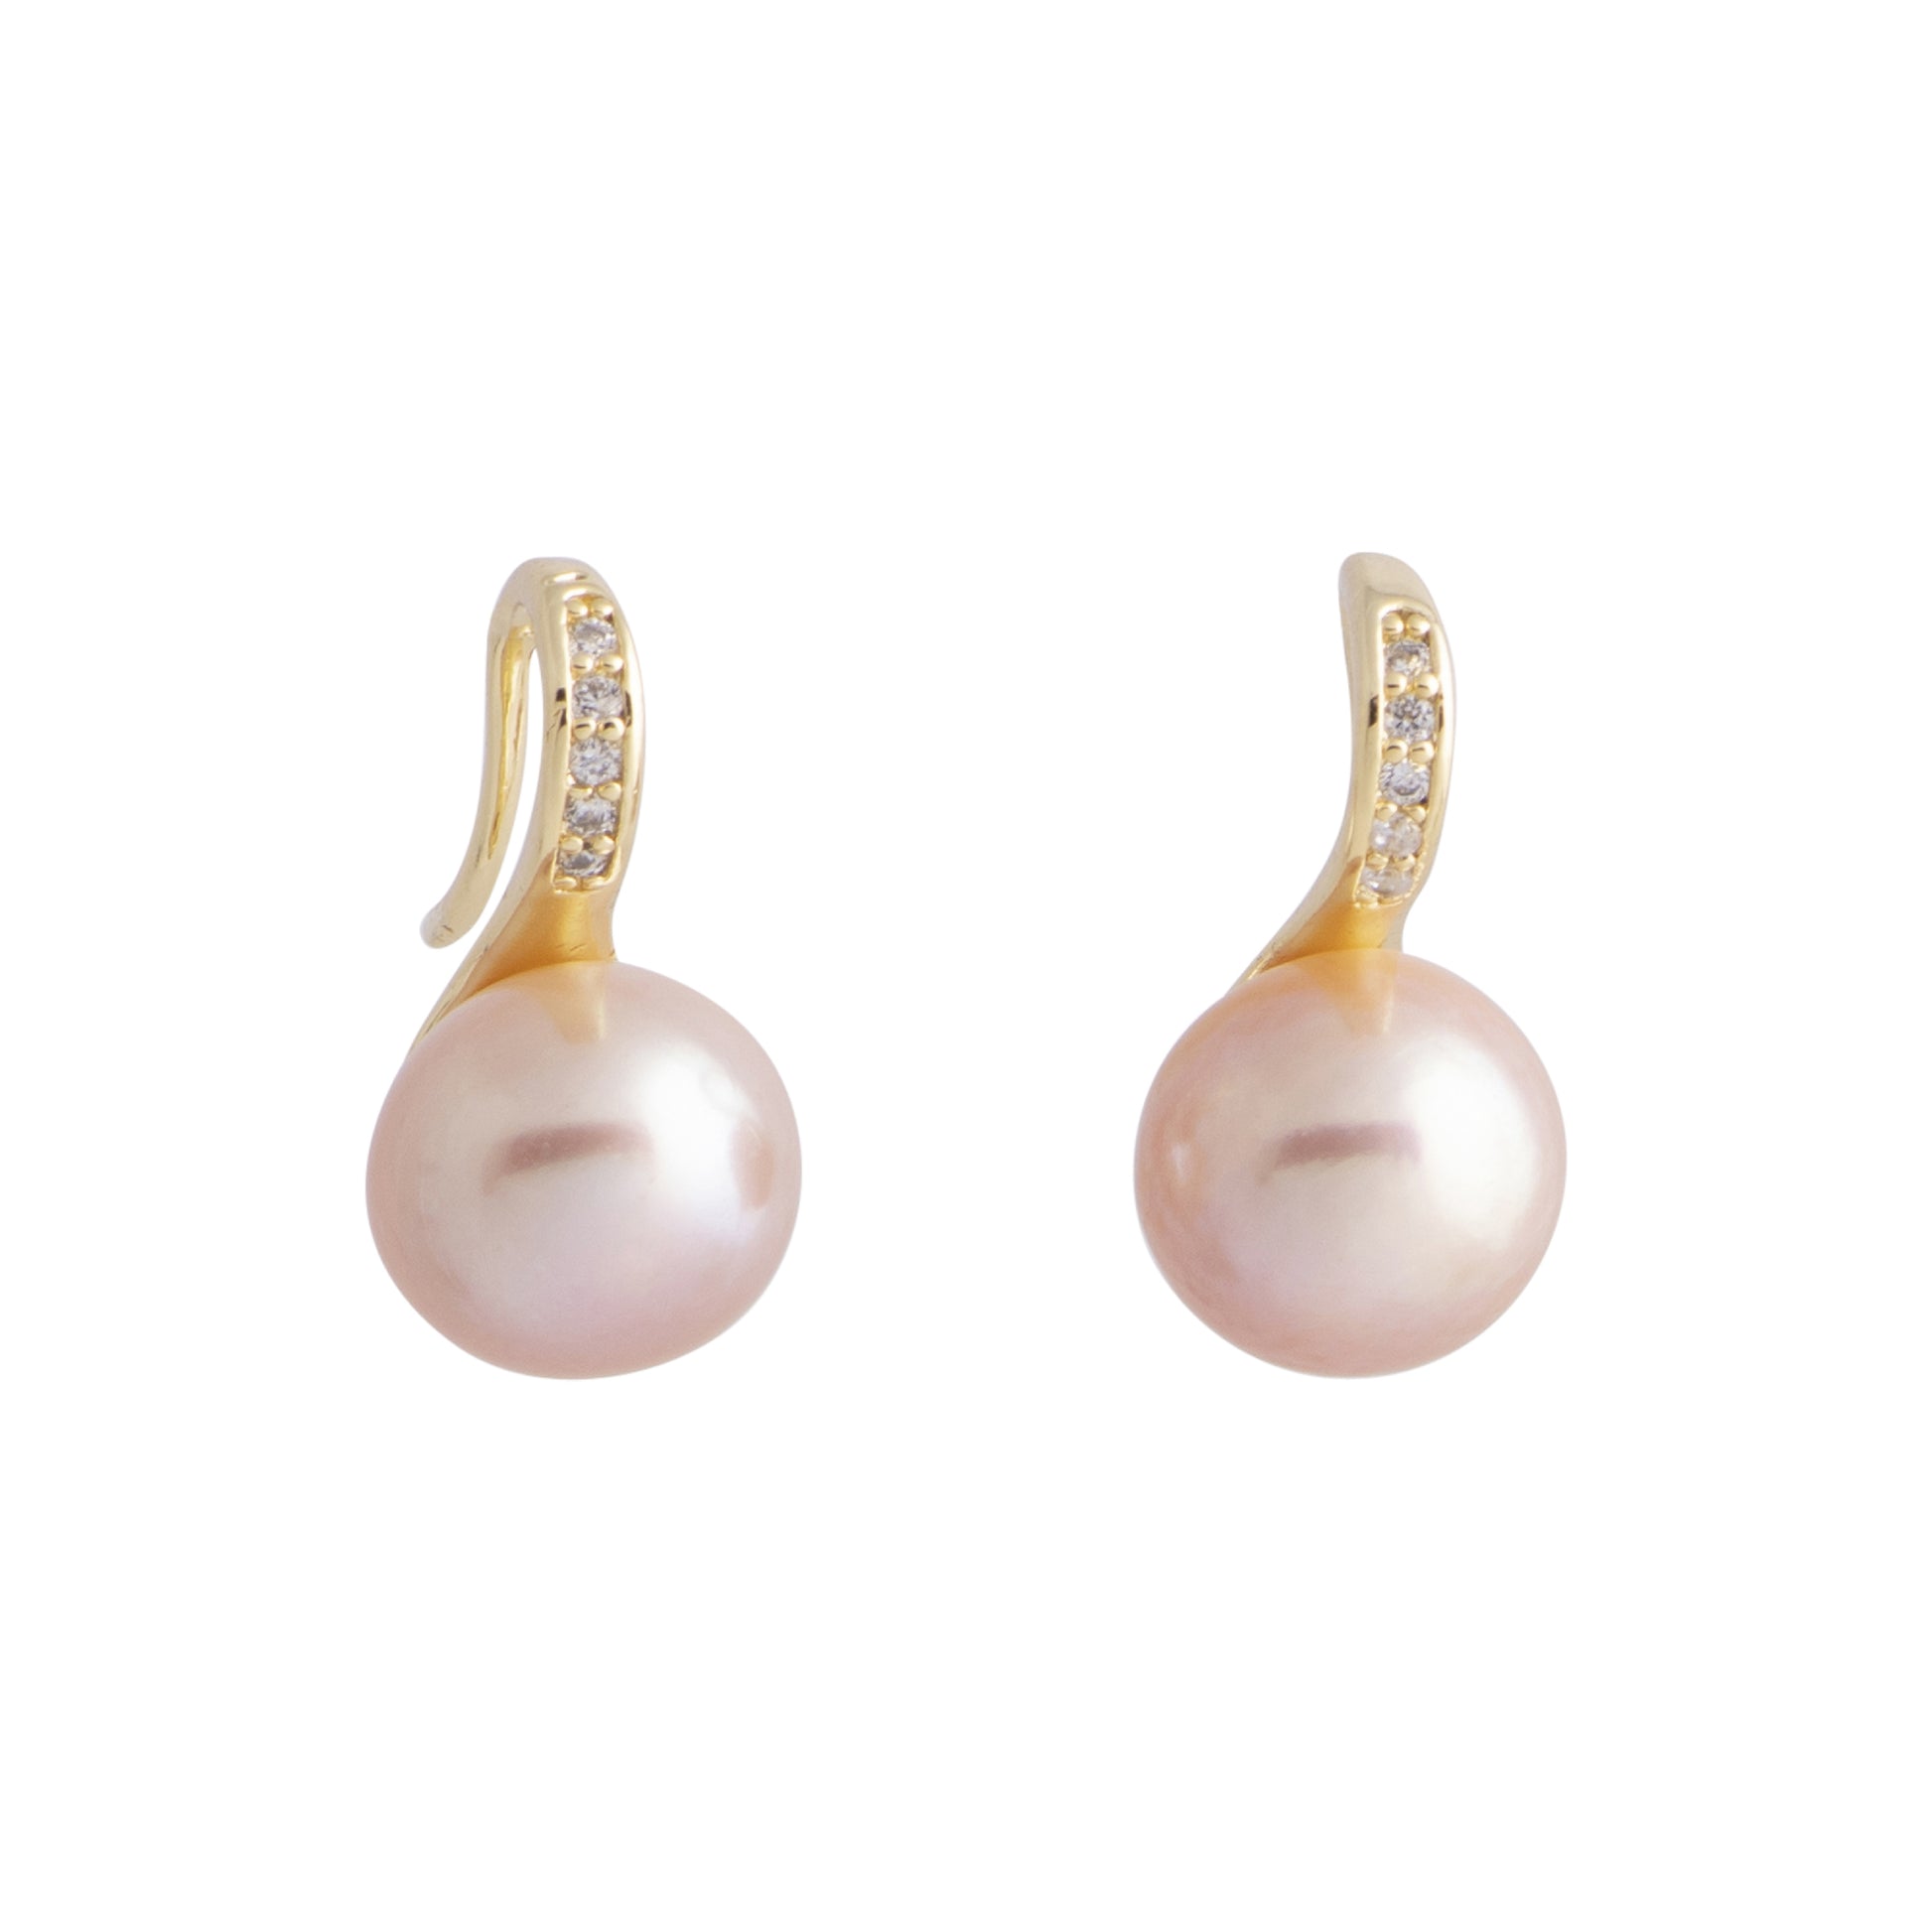 Europa - Gold-tone huggie earring with freshwater pearl (Natural pearls)